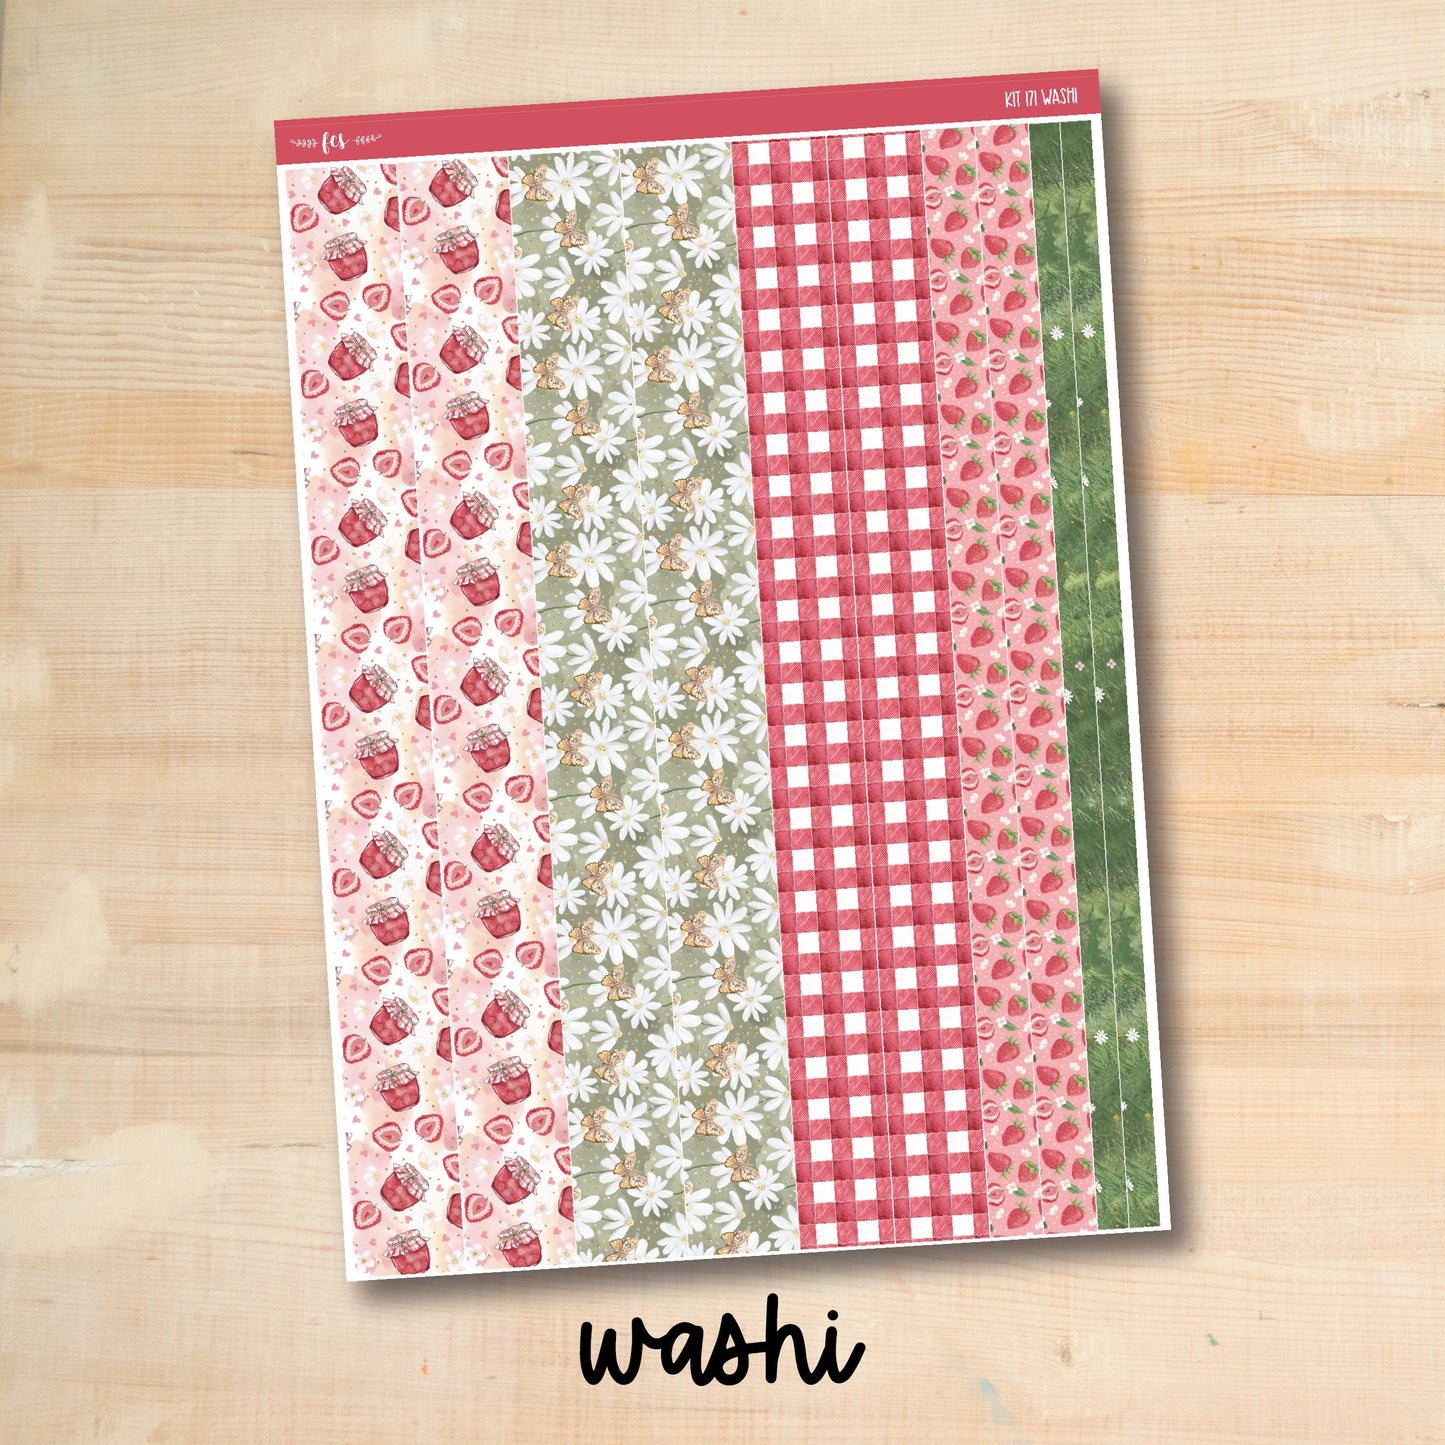 KIT-171 || BERRY SWEET weekly planner kit for Erin Condren, Plum Paper, MakseLife and more!